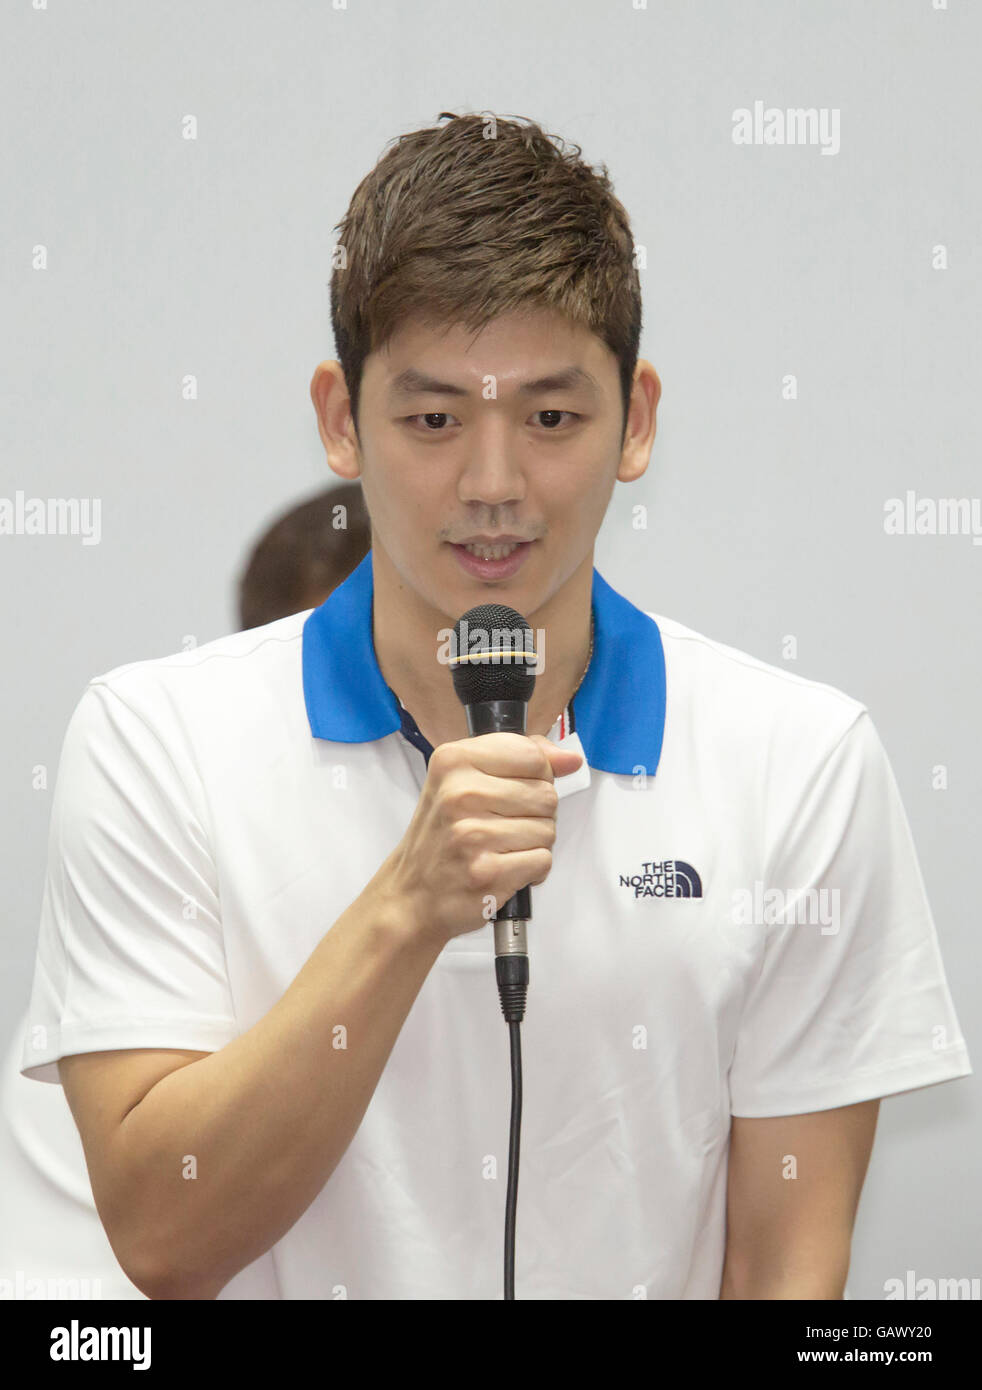 Lee Yong-dae, Jul 5, 2016 : South Korean badminton player Lee Yong-dae attends the pre-Rio Olympics media day at the National Training Center in Seoul, South Korea. Lee is one of South Korea's best prospects for a gold medal during the 2016 Rio Summer Olympic Games to be held in Rio de Janeiro, Brazil from August 5-21. © Lee Jae-Won/AFLO/Alamy Live News Stock Photo